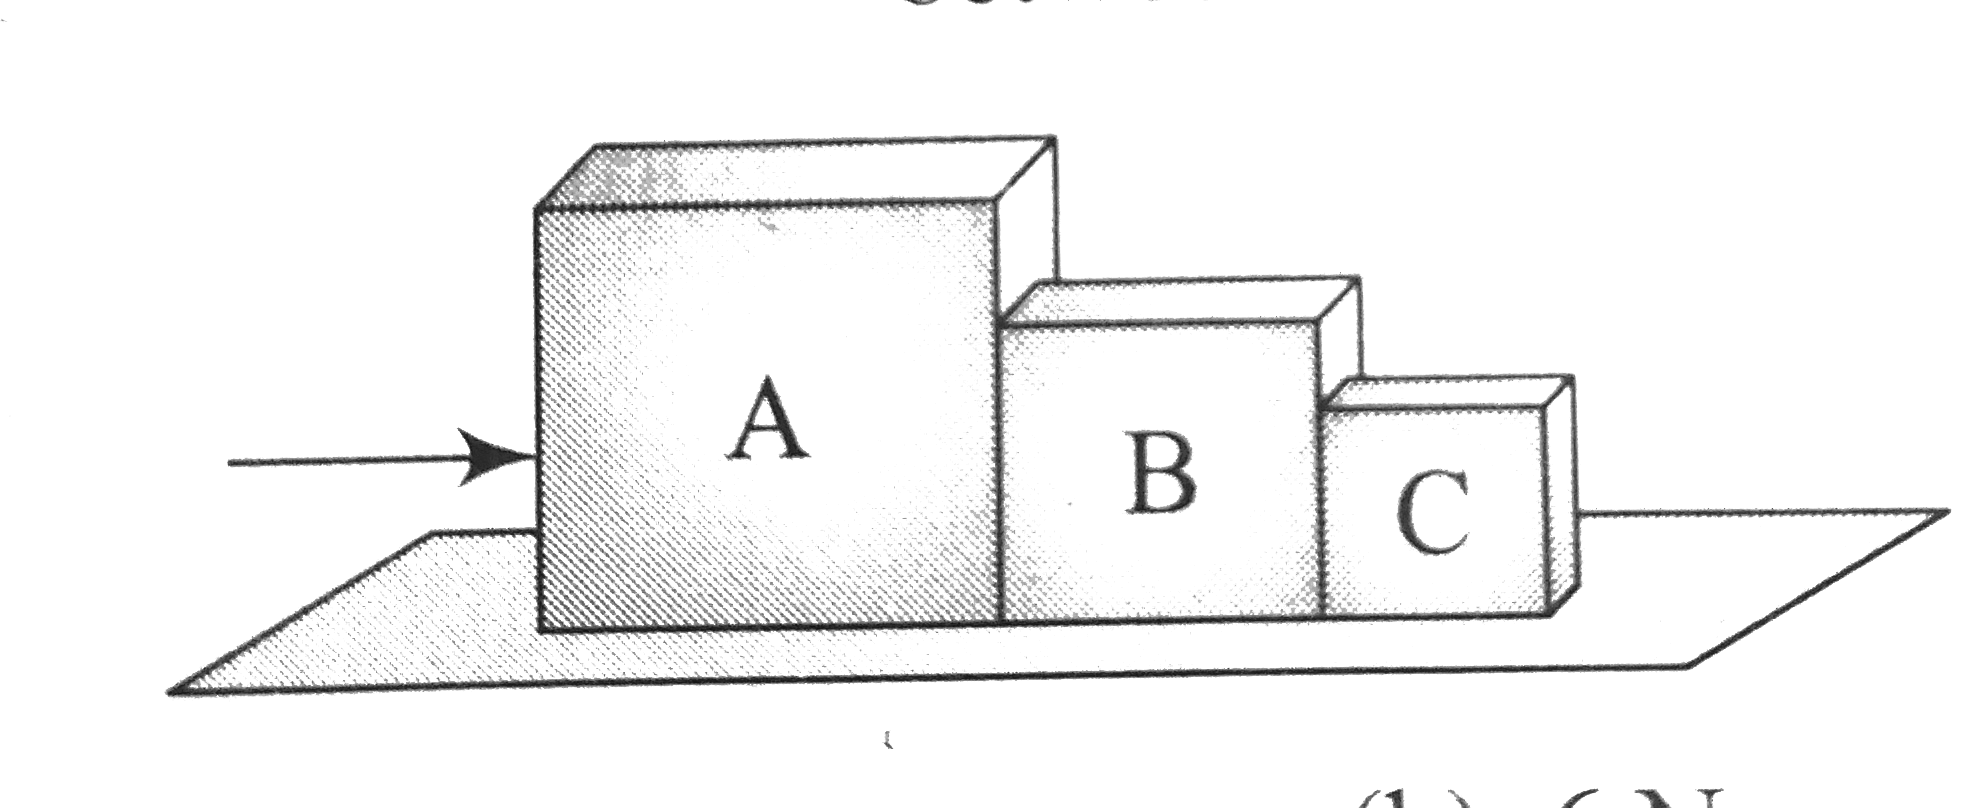 Three blocks A , B and C of masses 4kg , 2kg and 1kg respectively are in contact on a frictionless surface, as shown. If a force of 14N is applied on the 4kg block, then the contact force between A and B is.